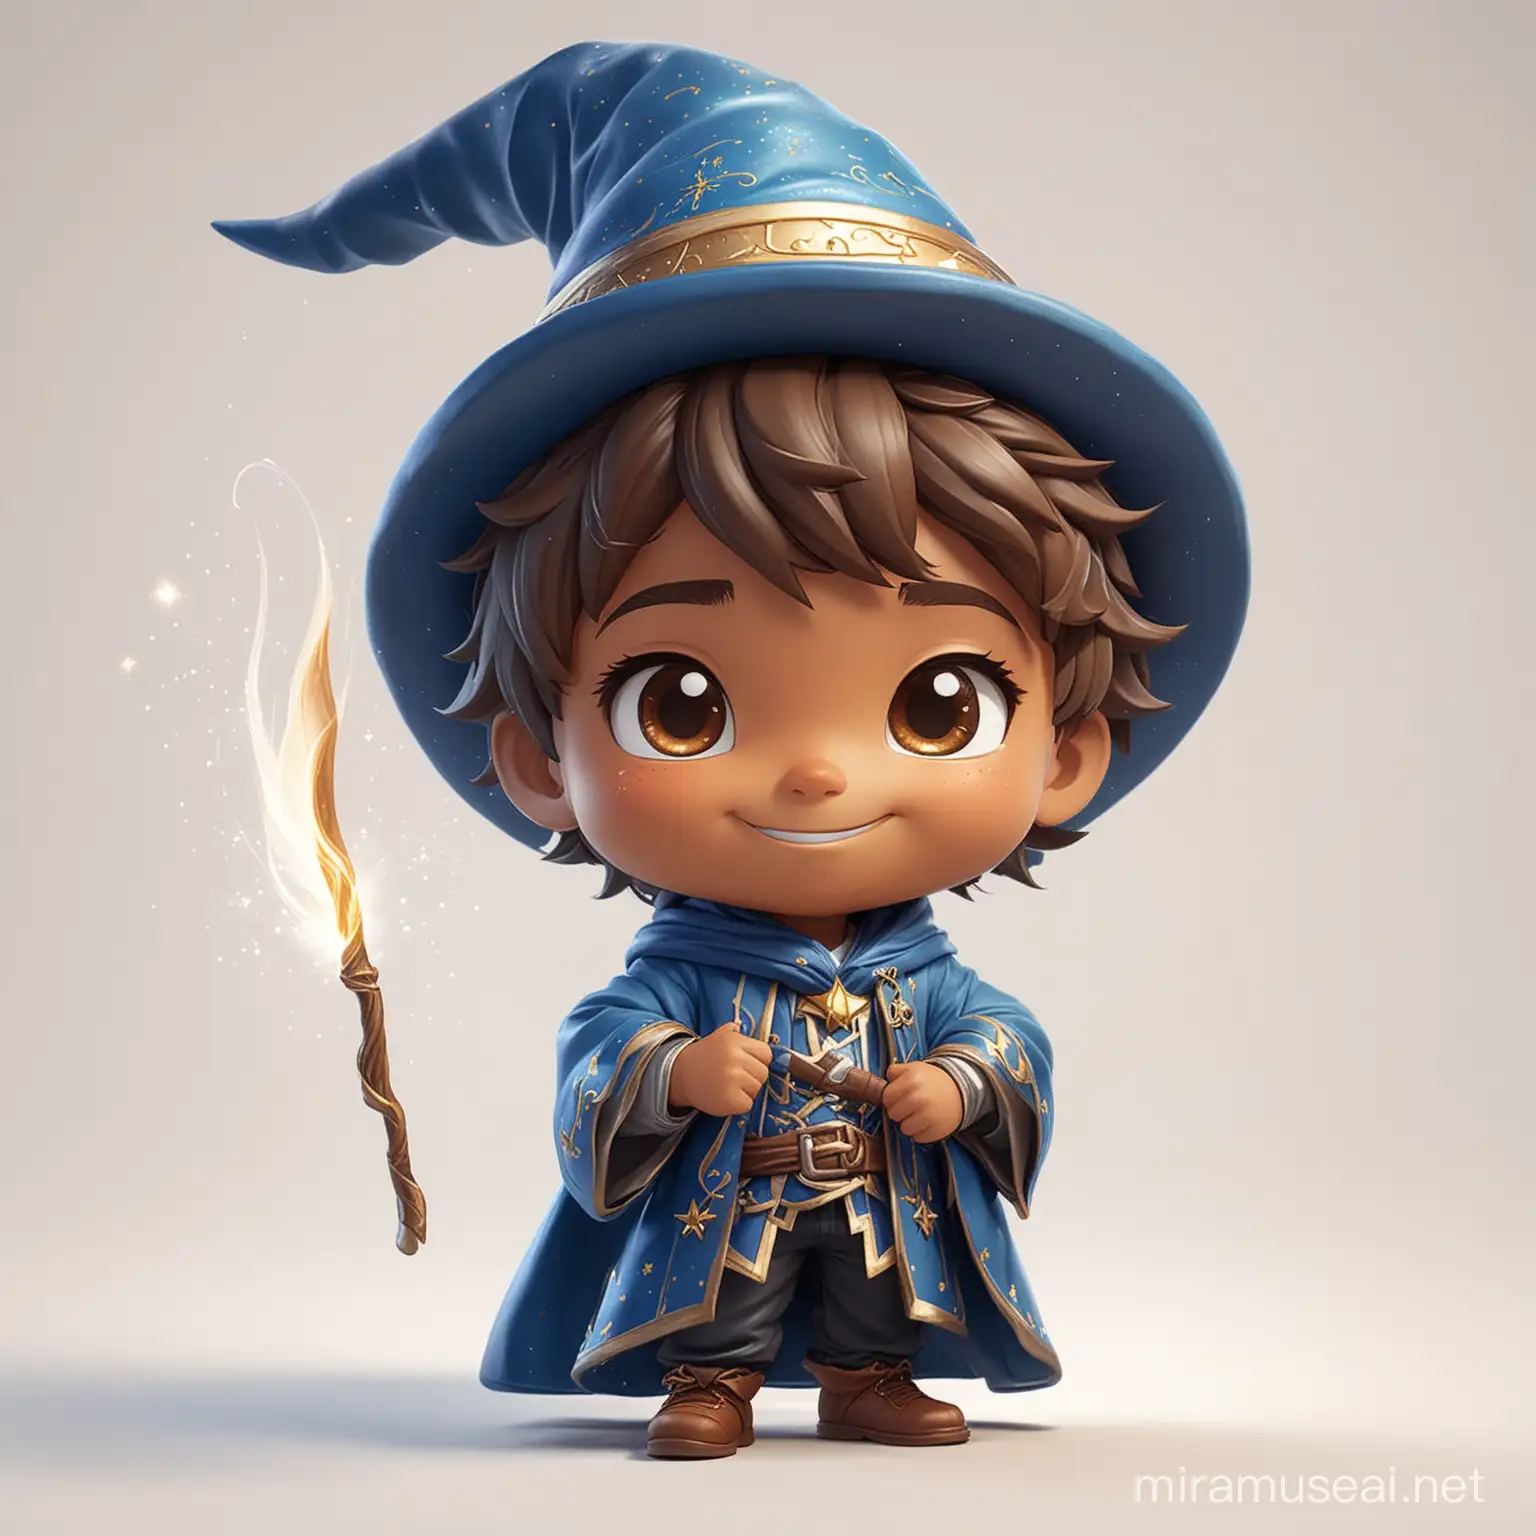 Smiling Magical Wizard Boy in Blue Robes on White Background Full Body Chibi Style